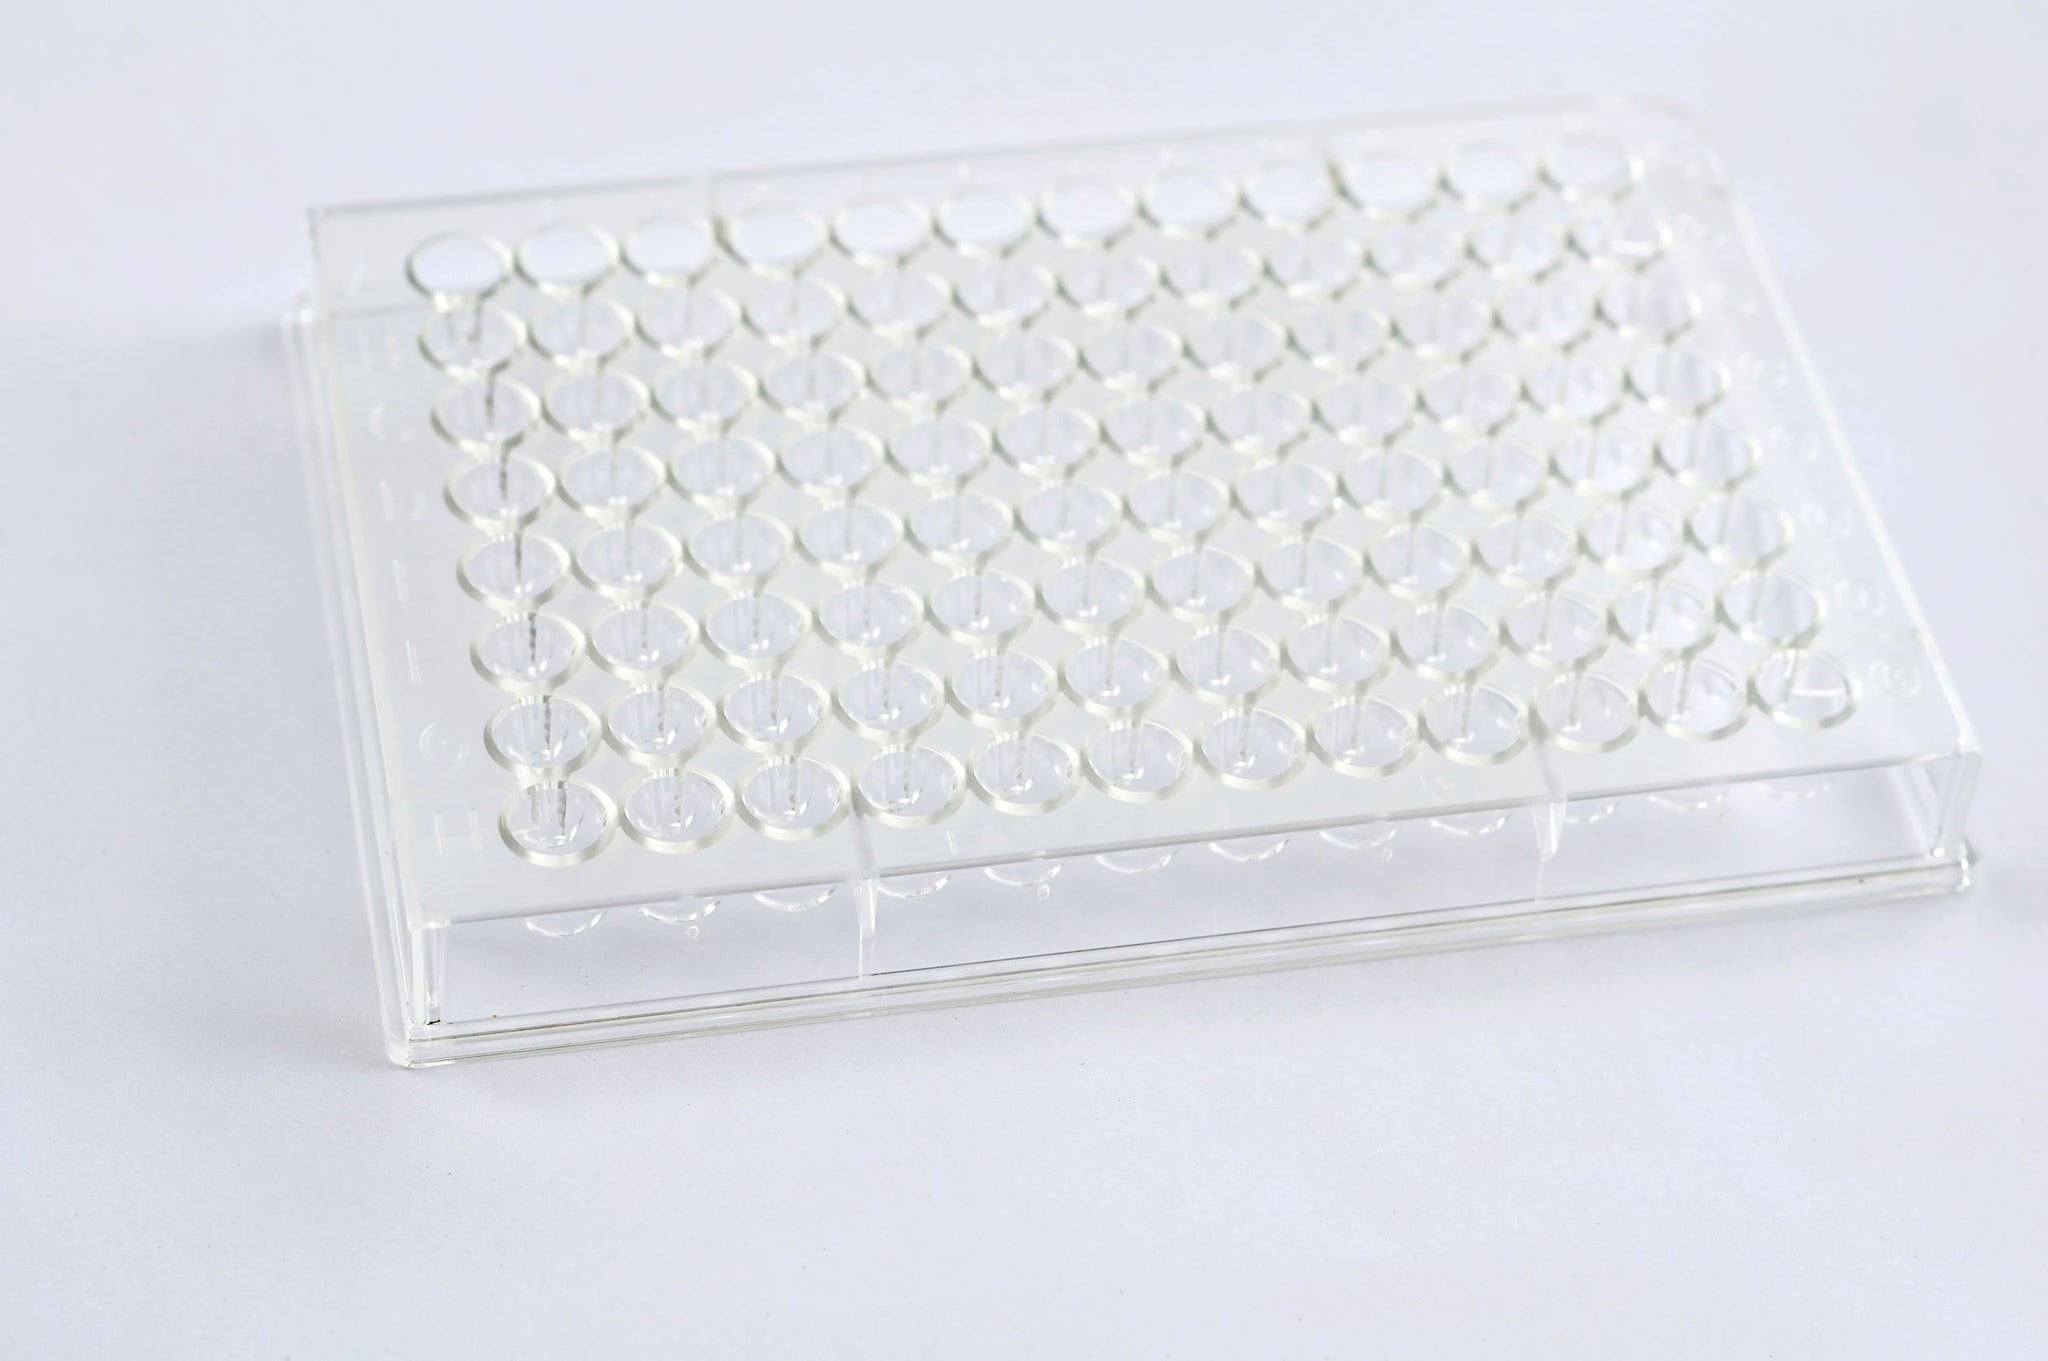 microplates, multiwell plates, standard plates, sbs plates